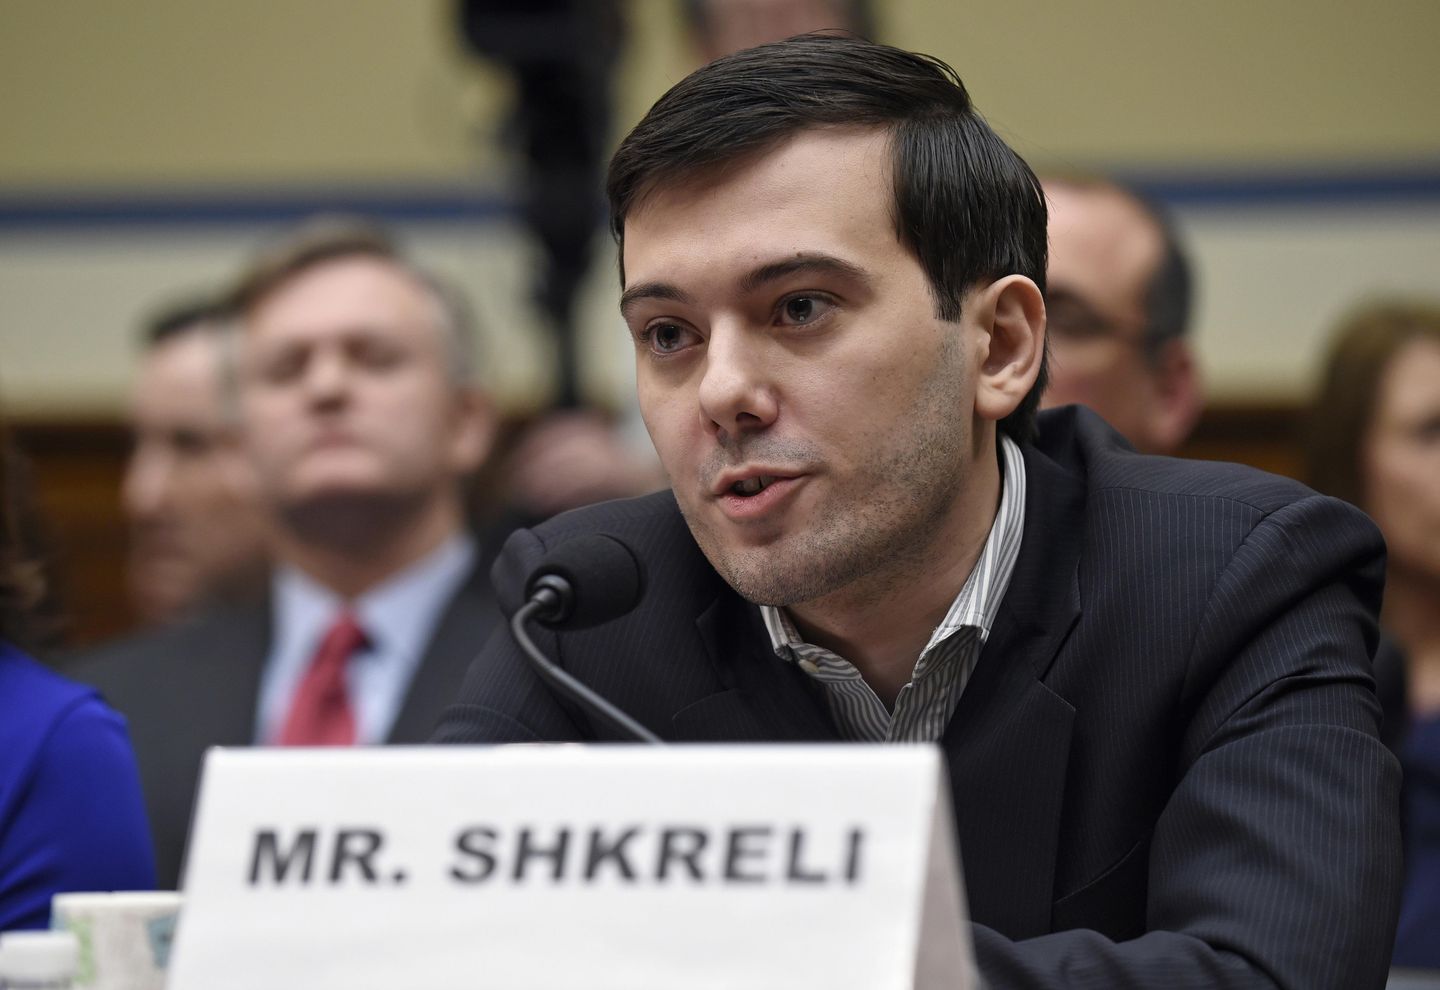 Federal Trade Commission asks judge to hold 'Pharma Bro' Martin Shkreli in contempt